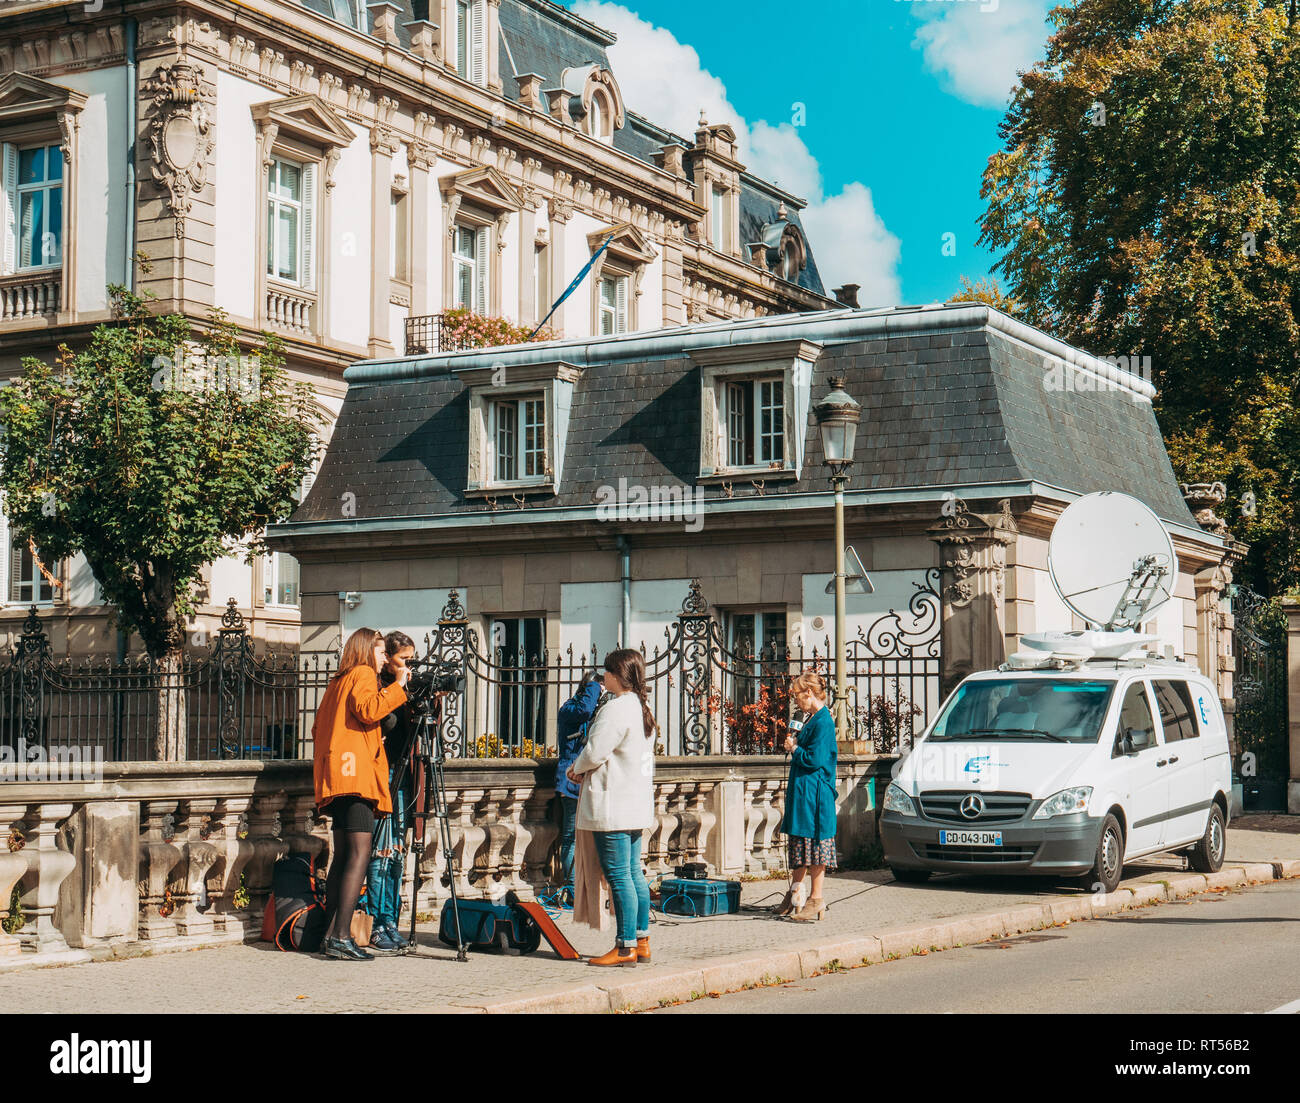 STRASBOURG, FRANCE - OCT 3, 2017: France 3 alsace reporters preparing to transmit live from the street of Strasbourg near the residence of Secretary General of the Council of Europe Stock Photo